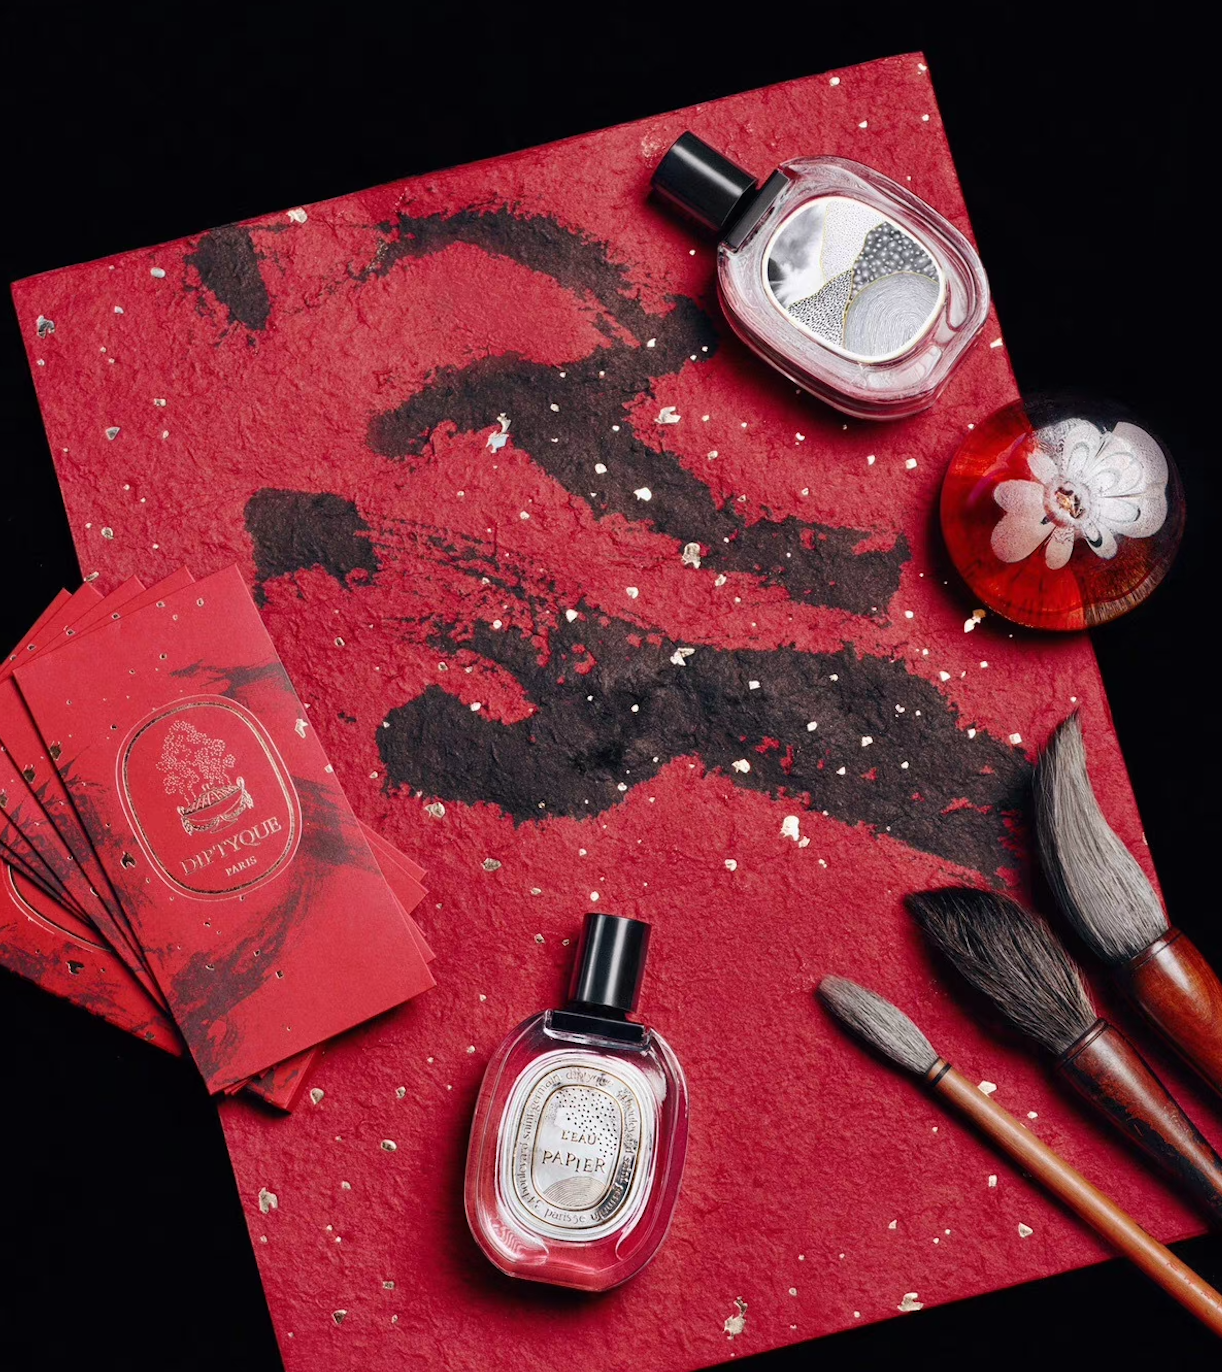 French Fragrance brand Diptyque has teamed up with Chinese calligraphy artist Ao Hei to spruce up its packaging. Image: Diptyque